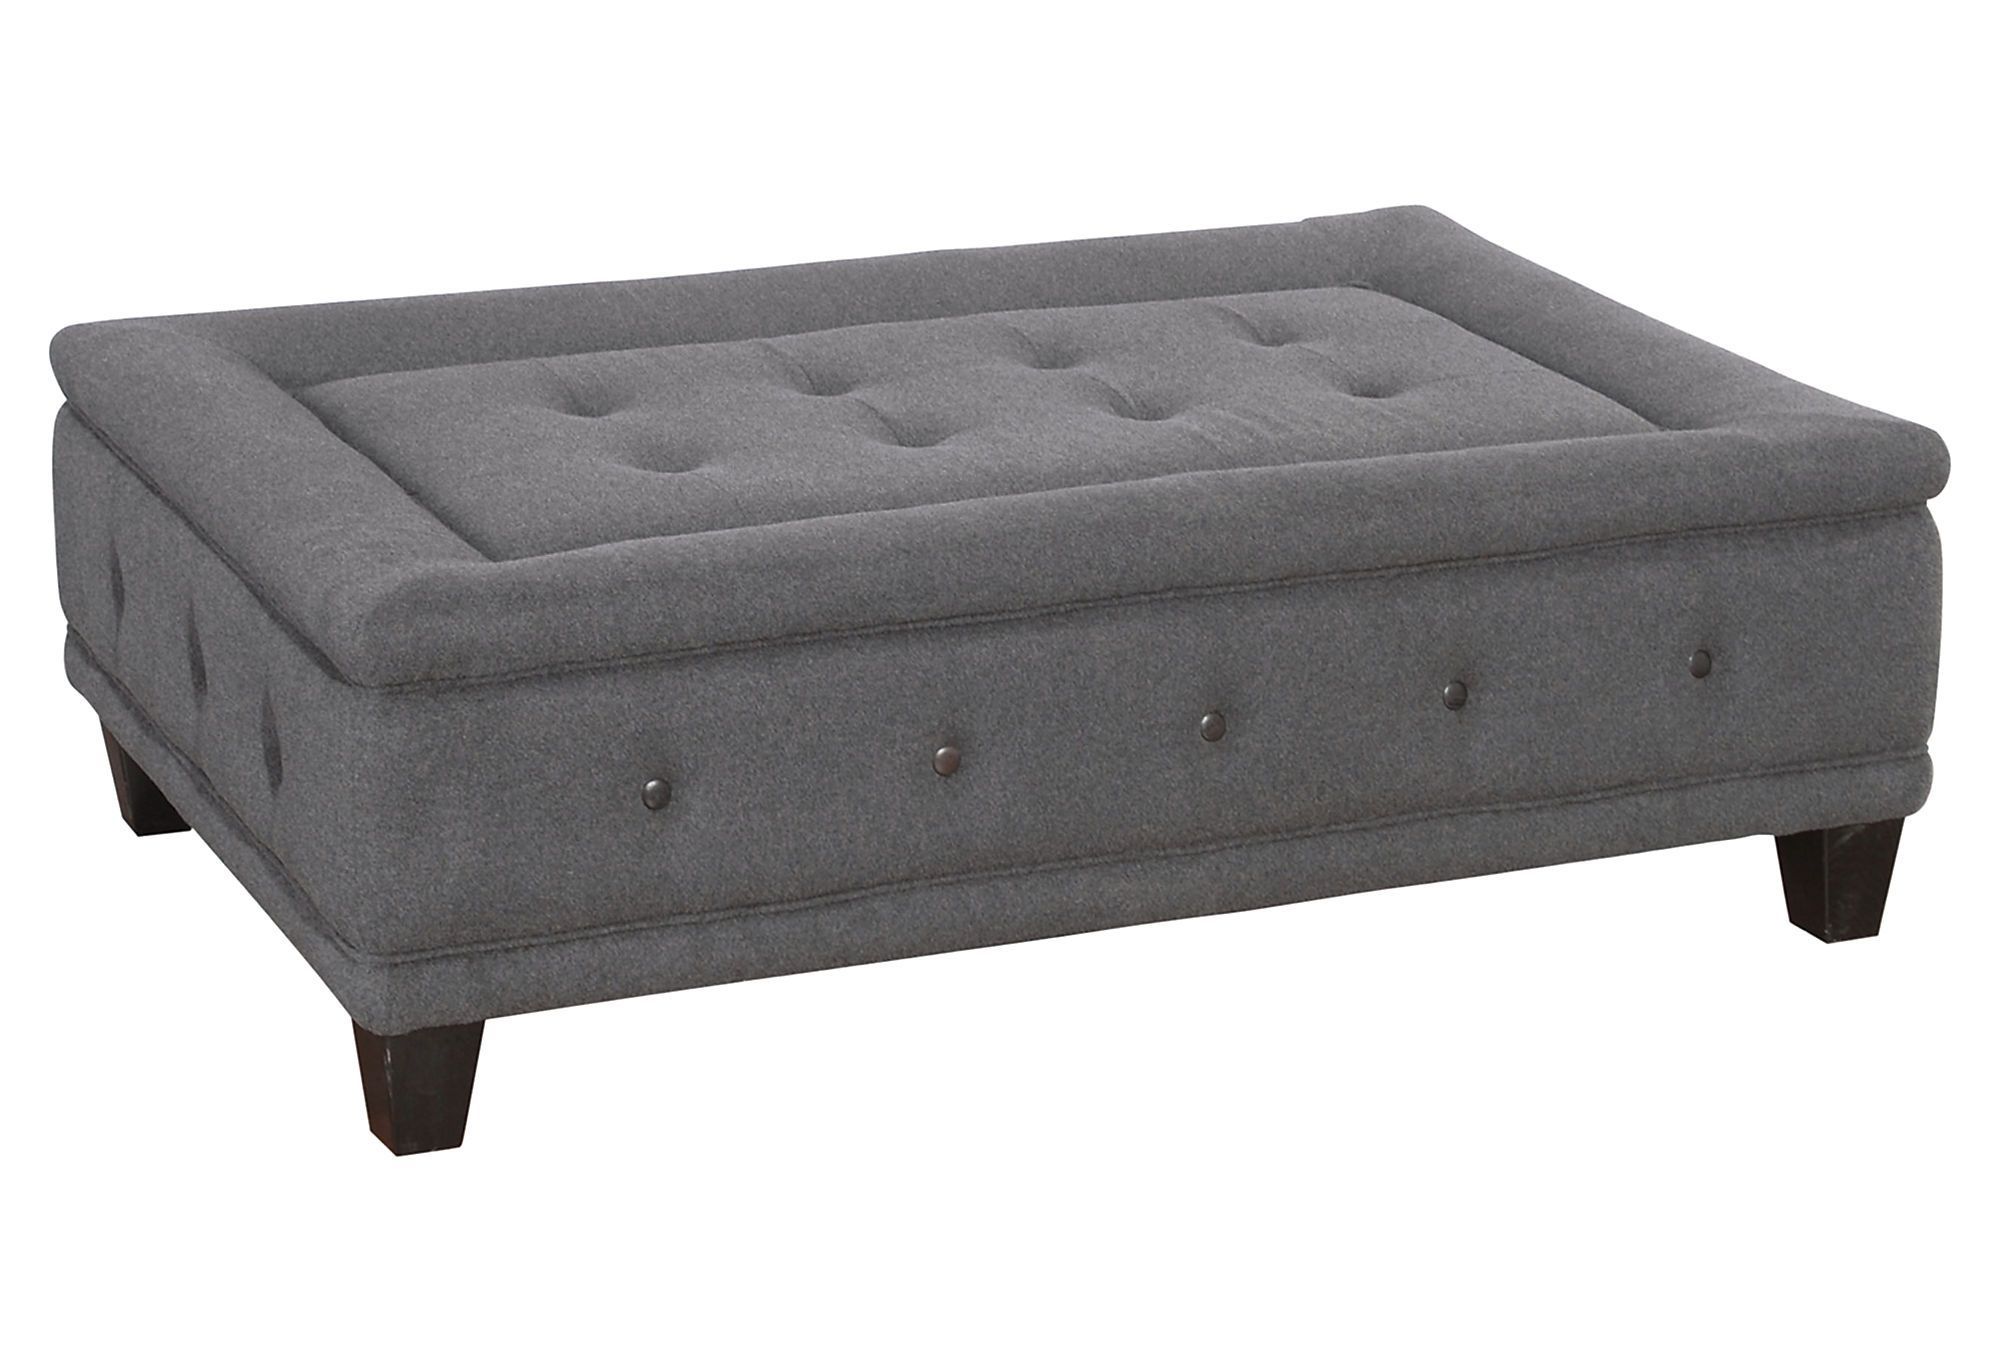 Ottoman, Upholstered With Popular Black Leather And Bronze Steel Tufted Ottomans (View 10 of 10)